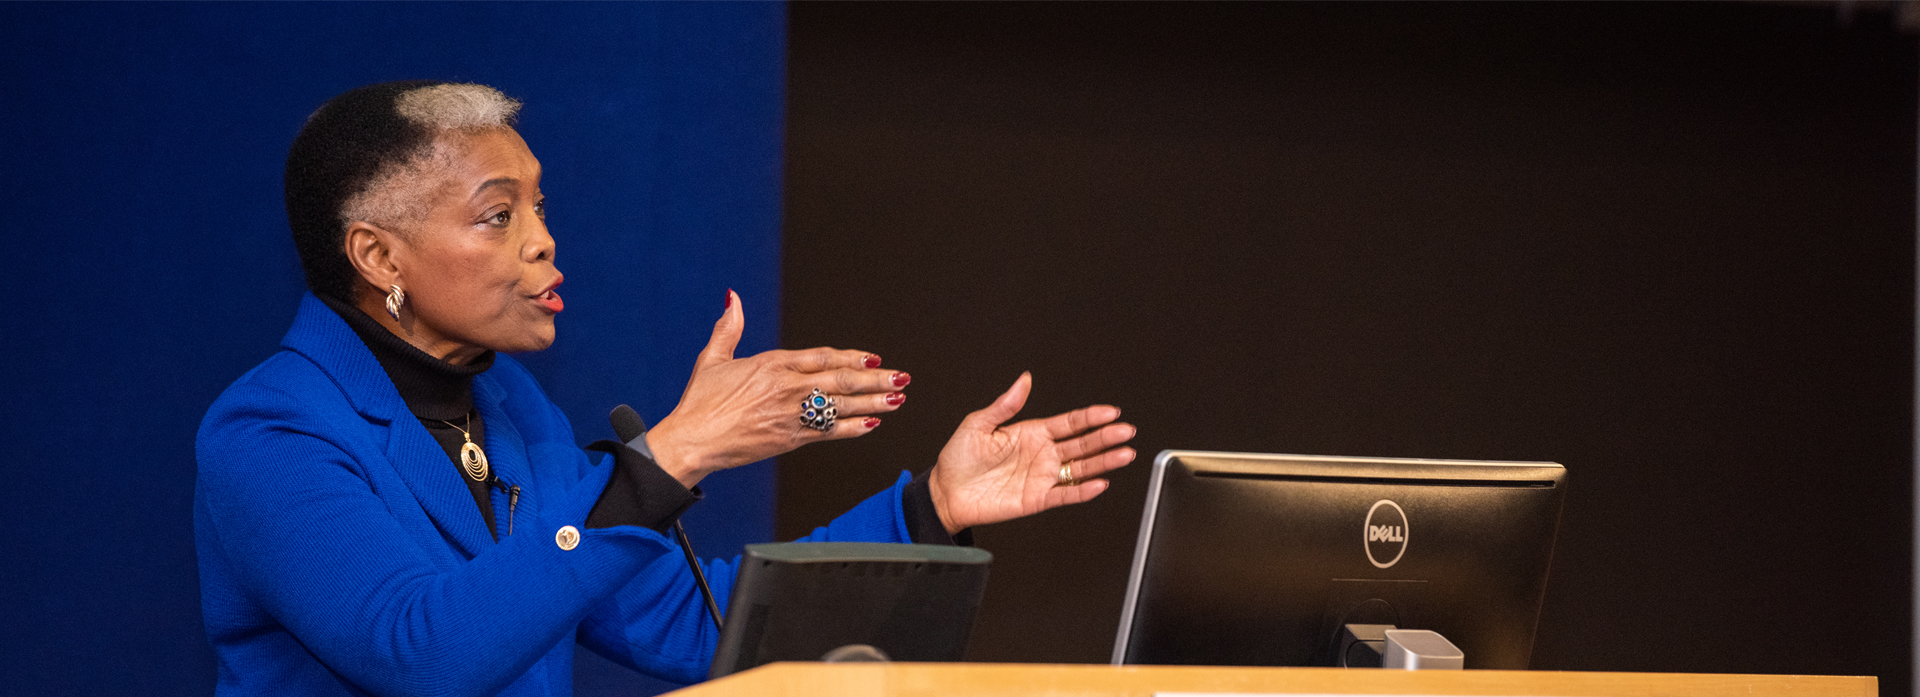 The extended SUNY New Paltz community has recently attended presentations by Emmy award-winning alumna Janus Adams ’67 (Theatre Arts) and YouTube chief business officer Robert Kyncl ’95 (International Relations).